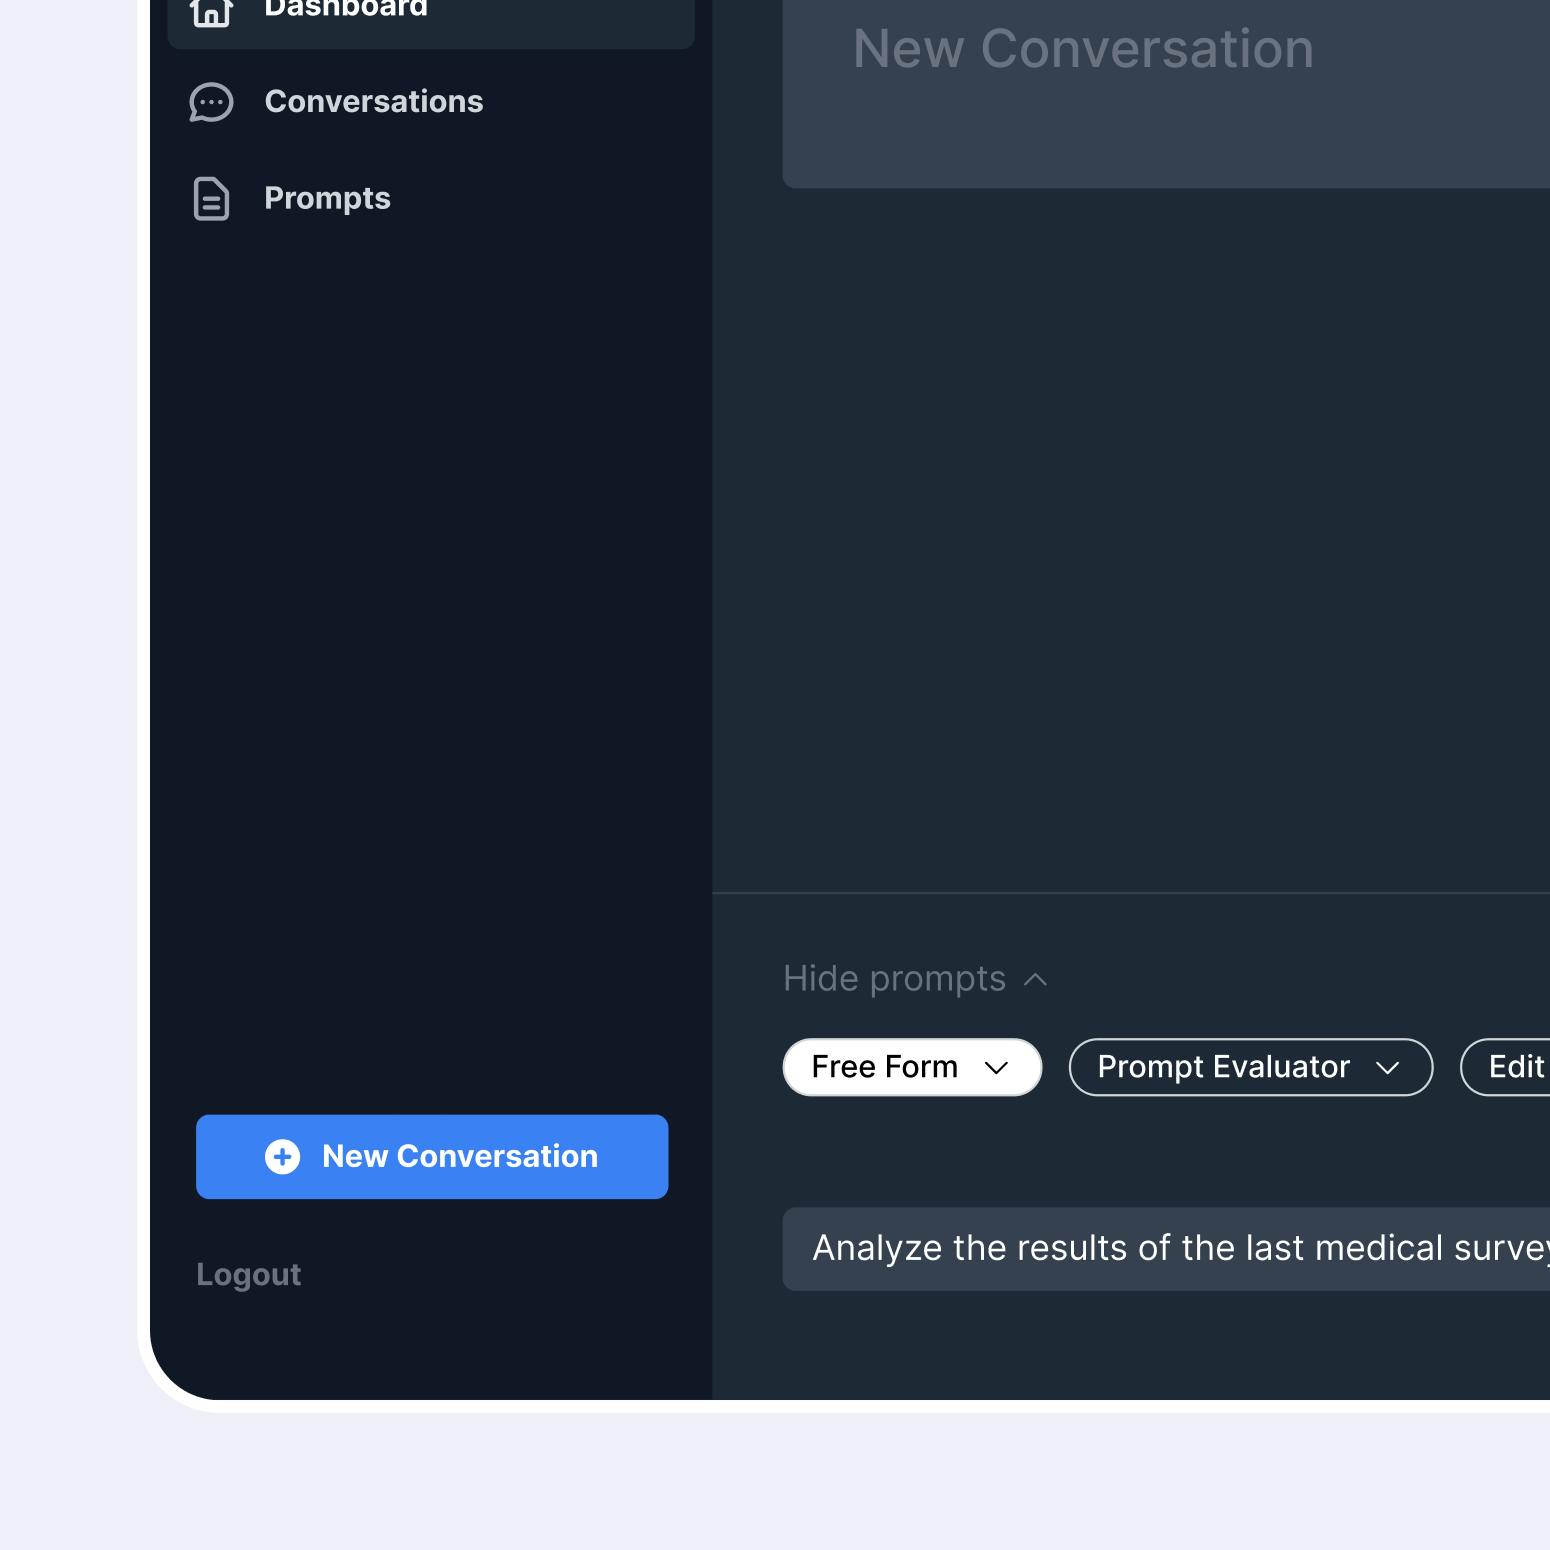 Screenshot of the Generative AI user interface showing a "new conversation" button and a text field for typing in an AI prompt.